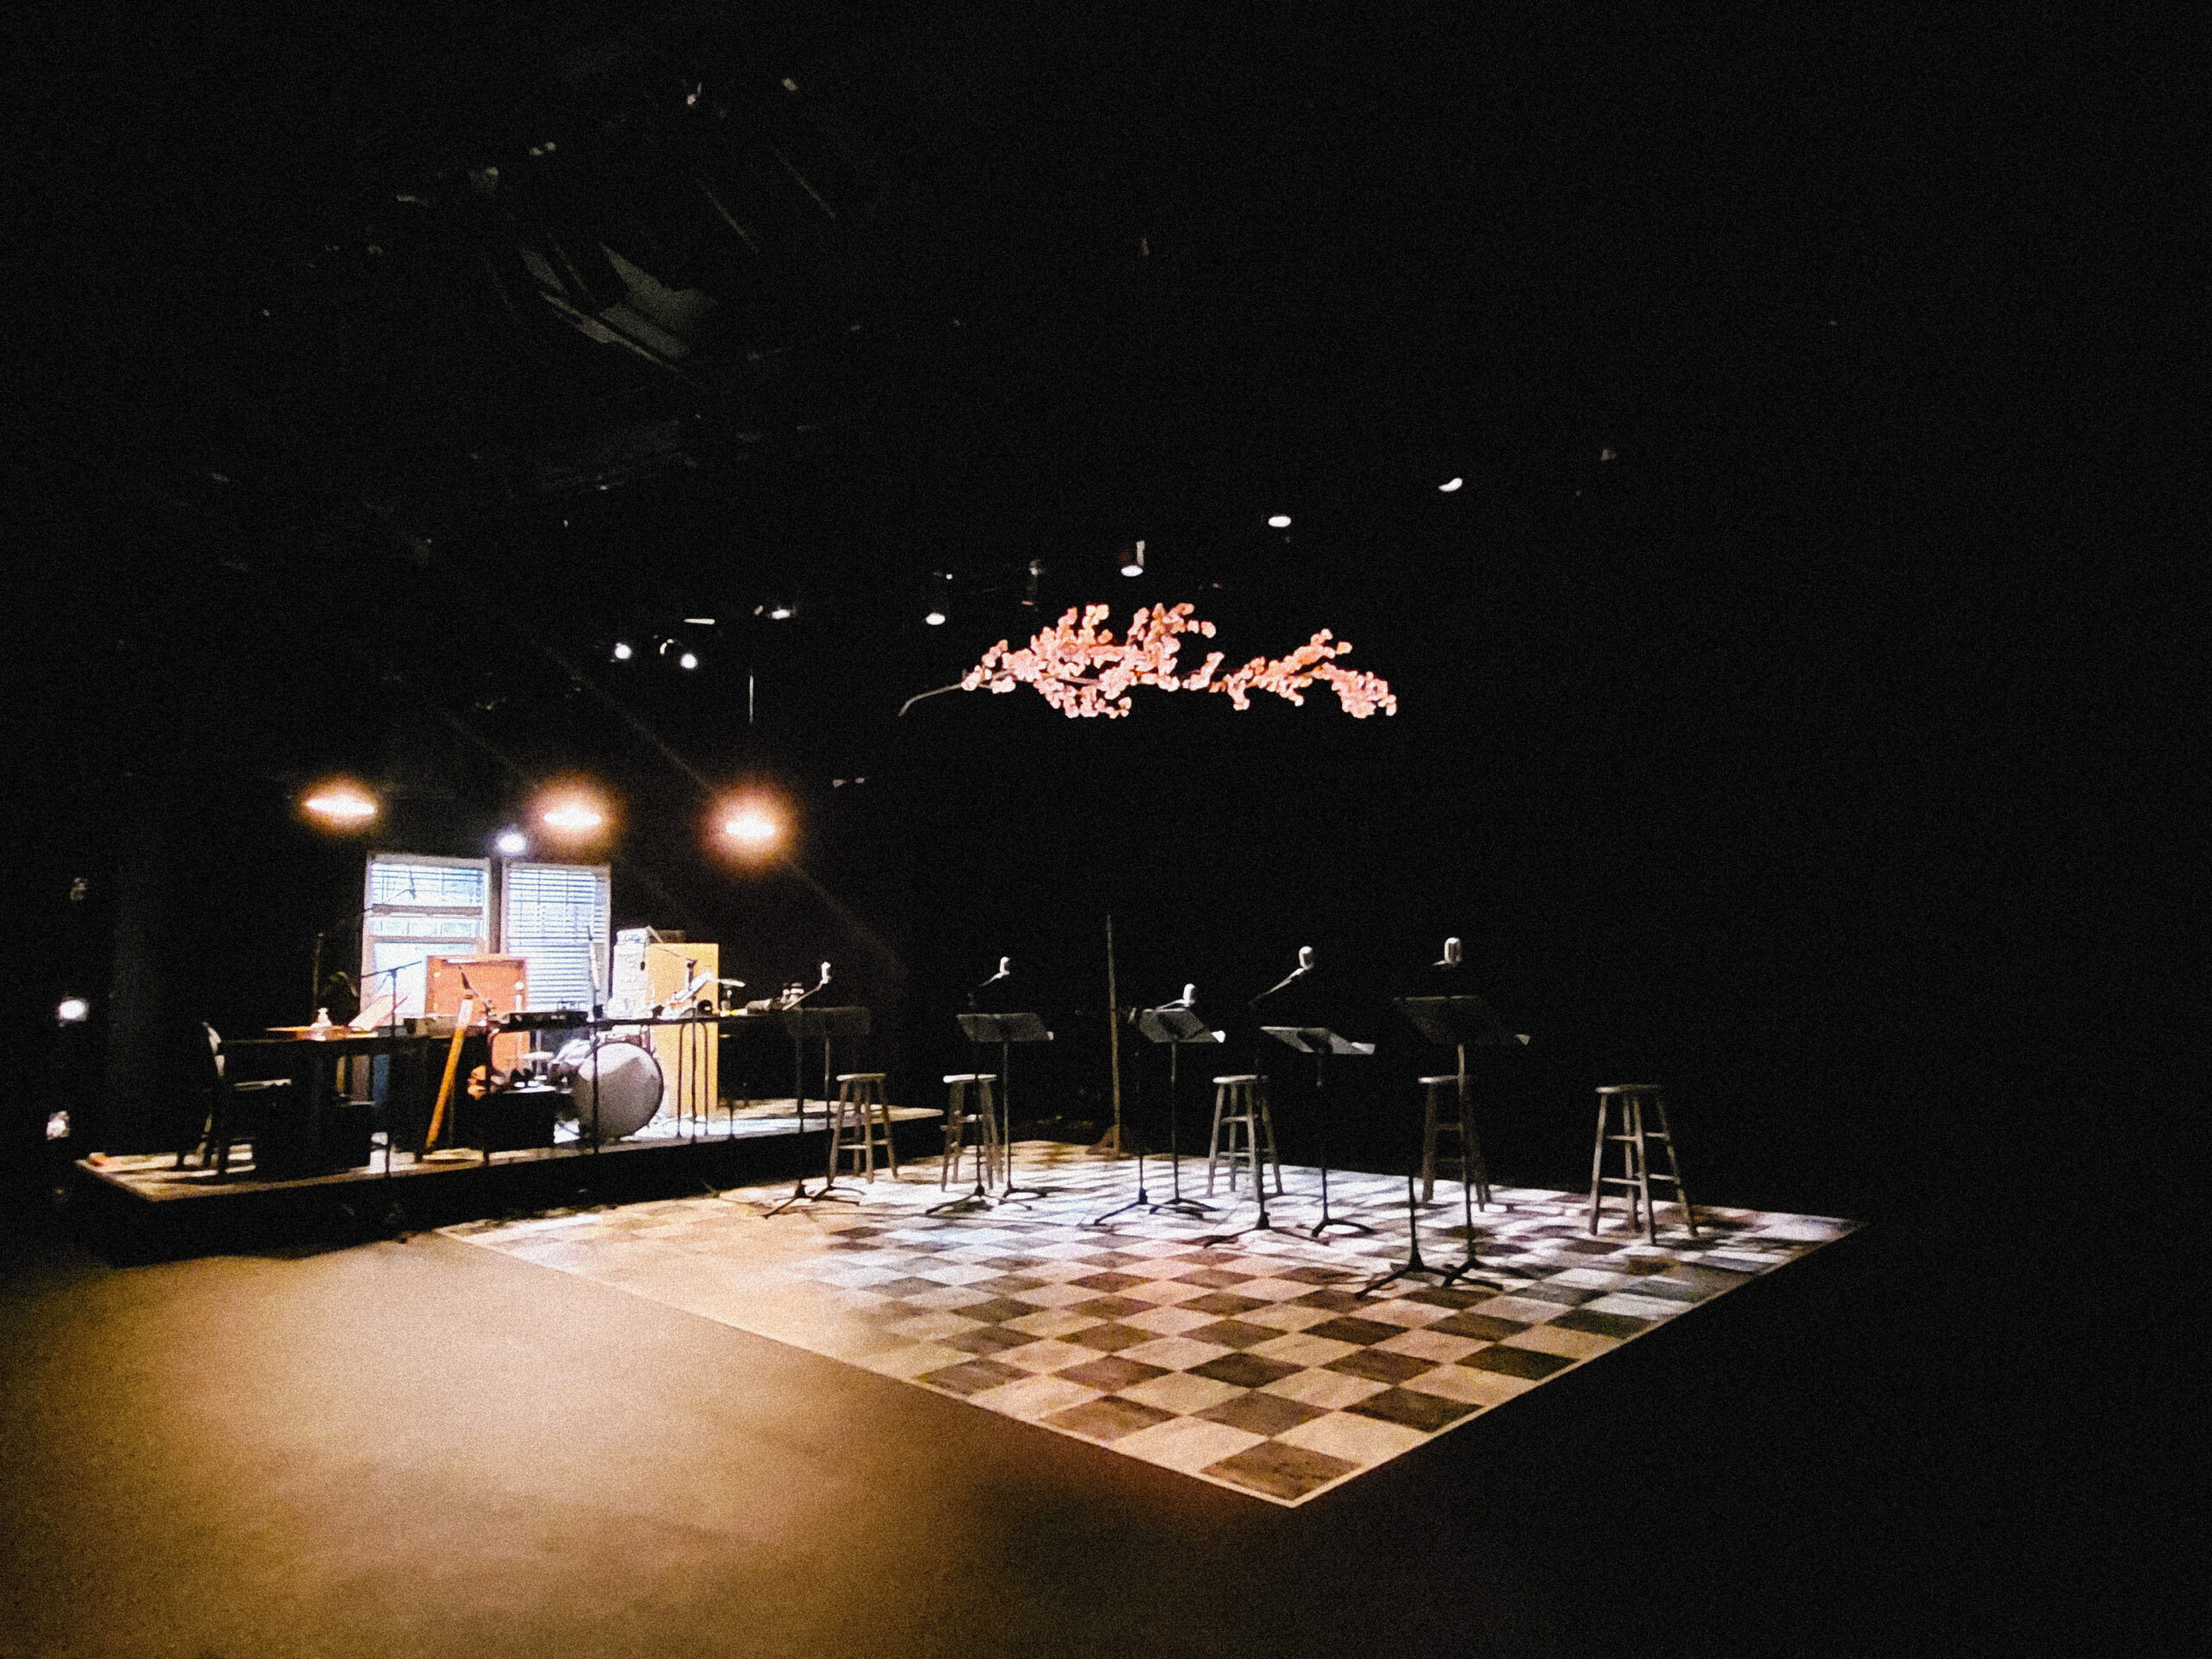 Darkened stage set with warm spotlights cast on a checkered floor decal with 5 stools set up for a Q&A. Behind them is a glowing projection of a pink cherry blossom branch extending out horizontally.